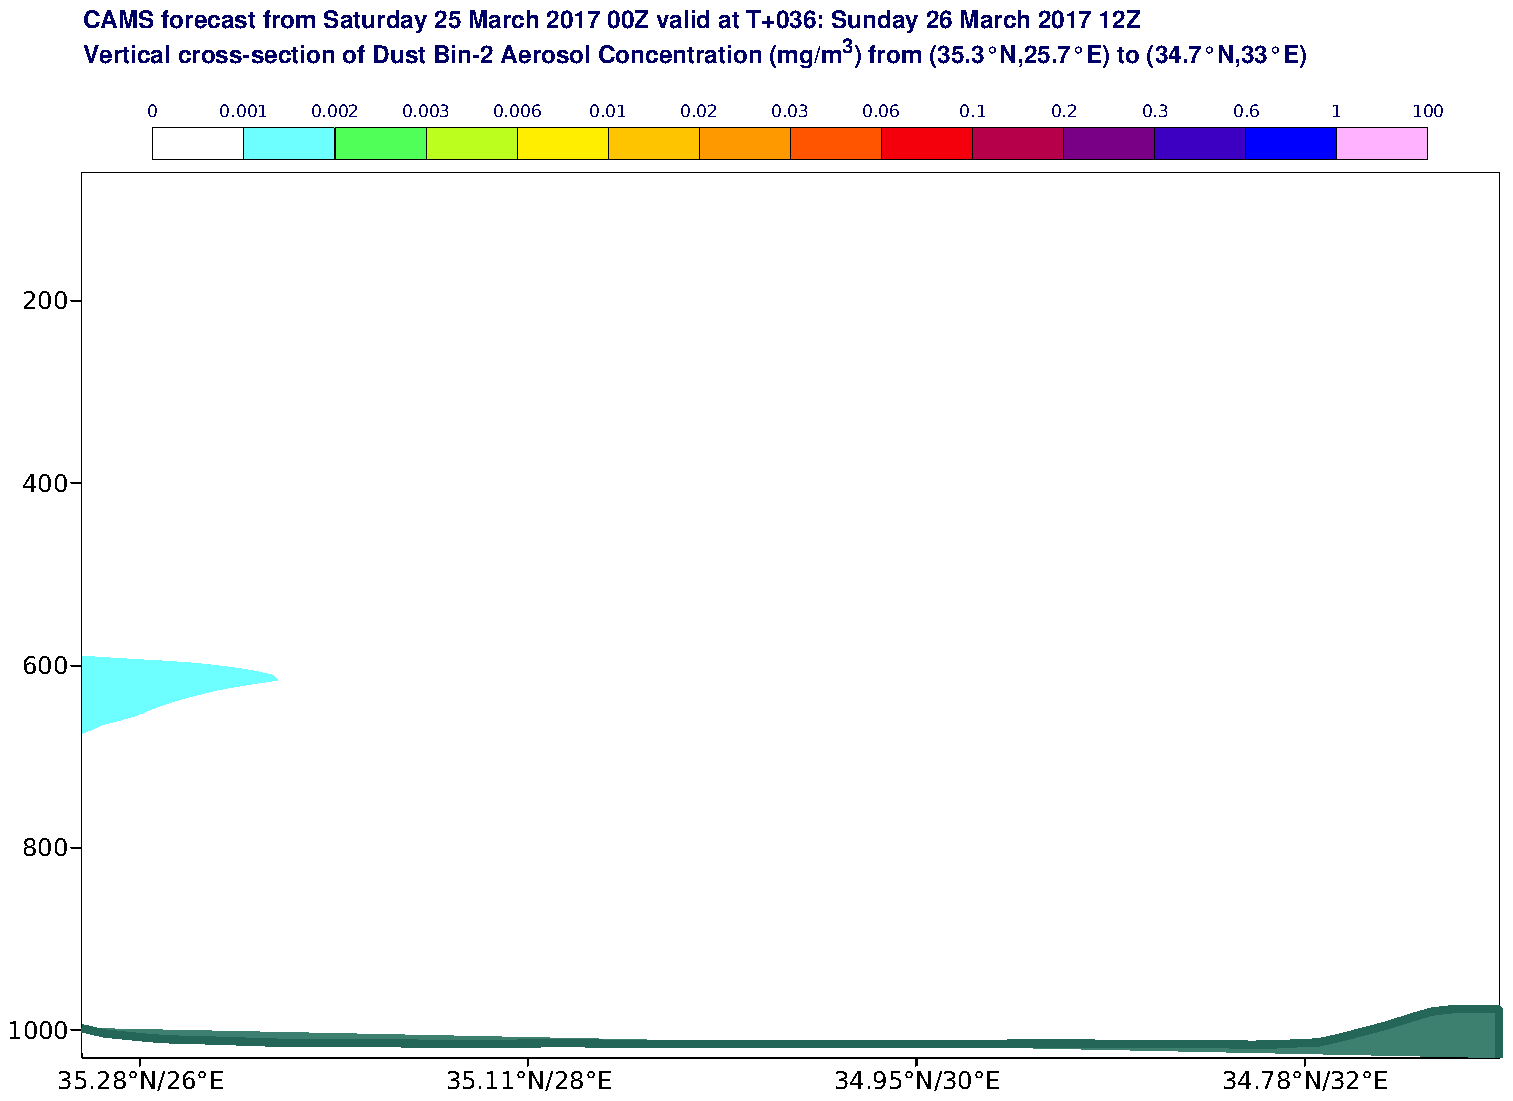 Vertical cross-section of Dust Bin-2 Aerosol Concentration (mg/m3) valid at T36 - 2017-03-26 12:00